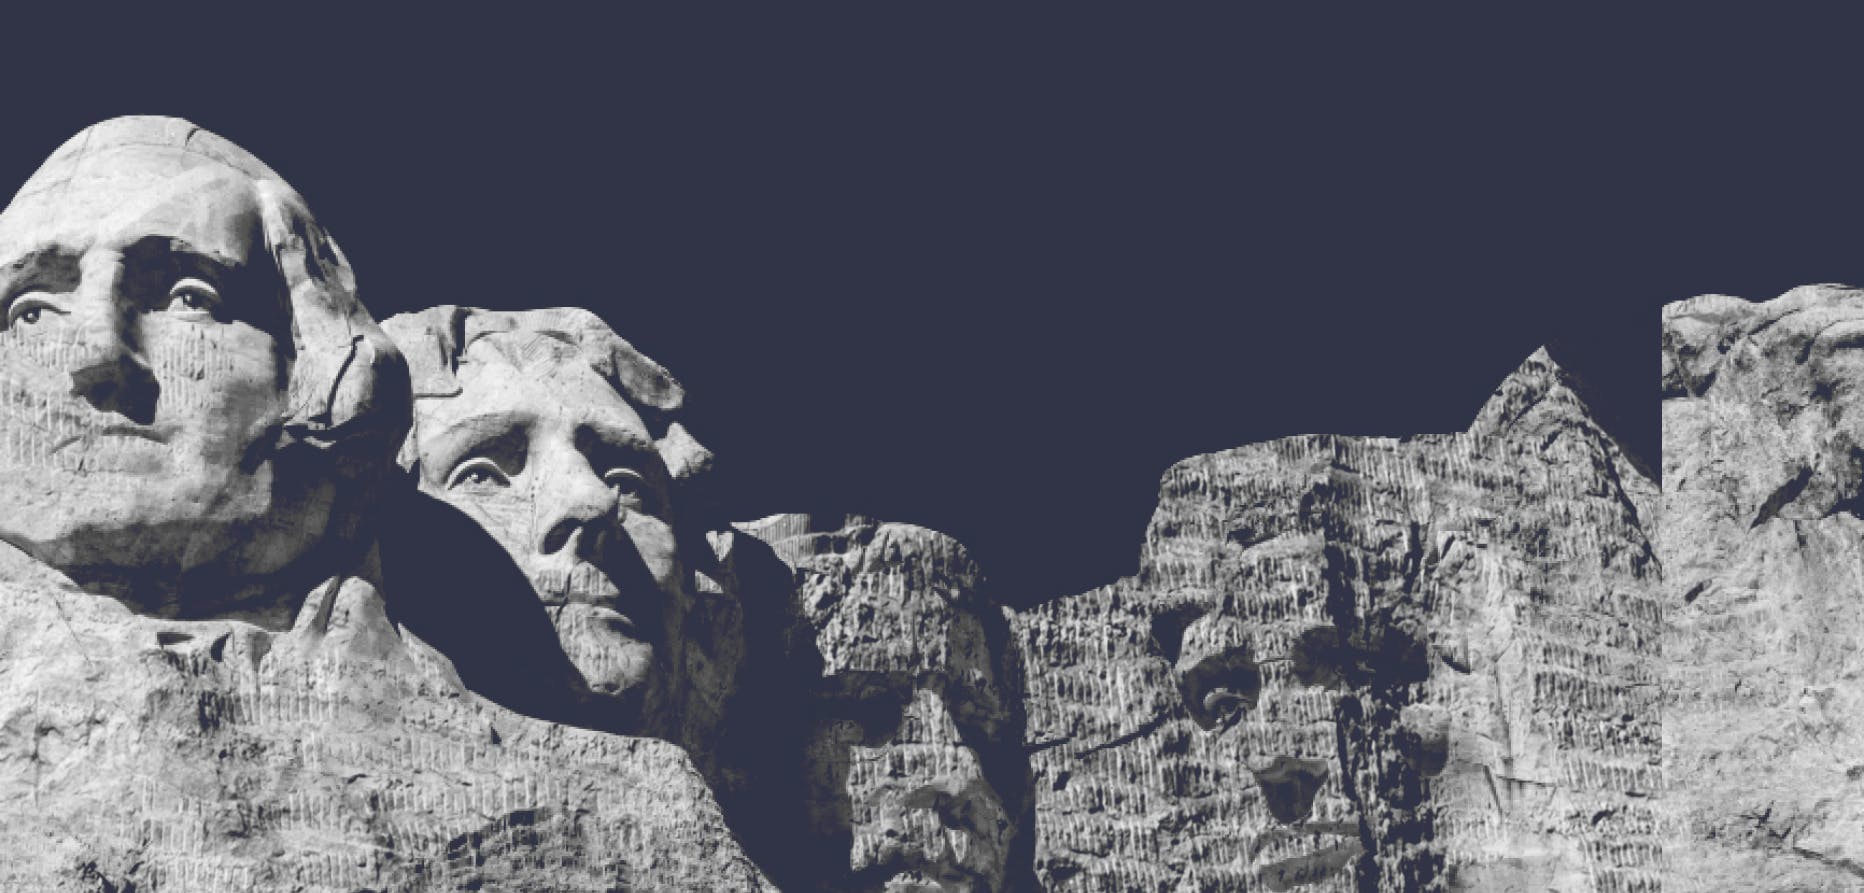 Black and white image of Mount Rushmore with dark blue background color.